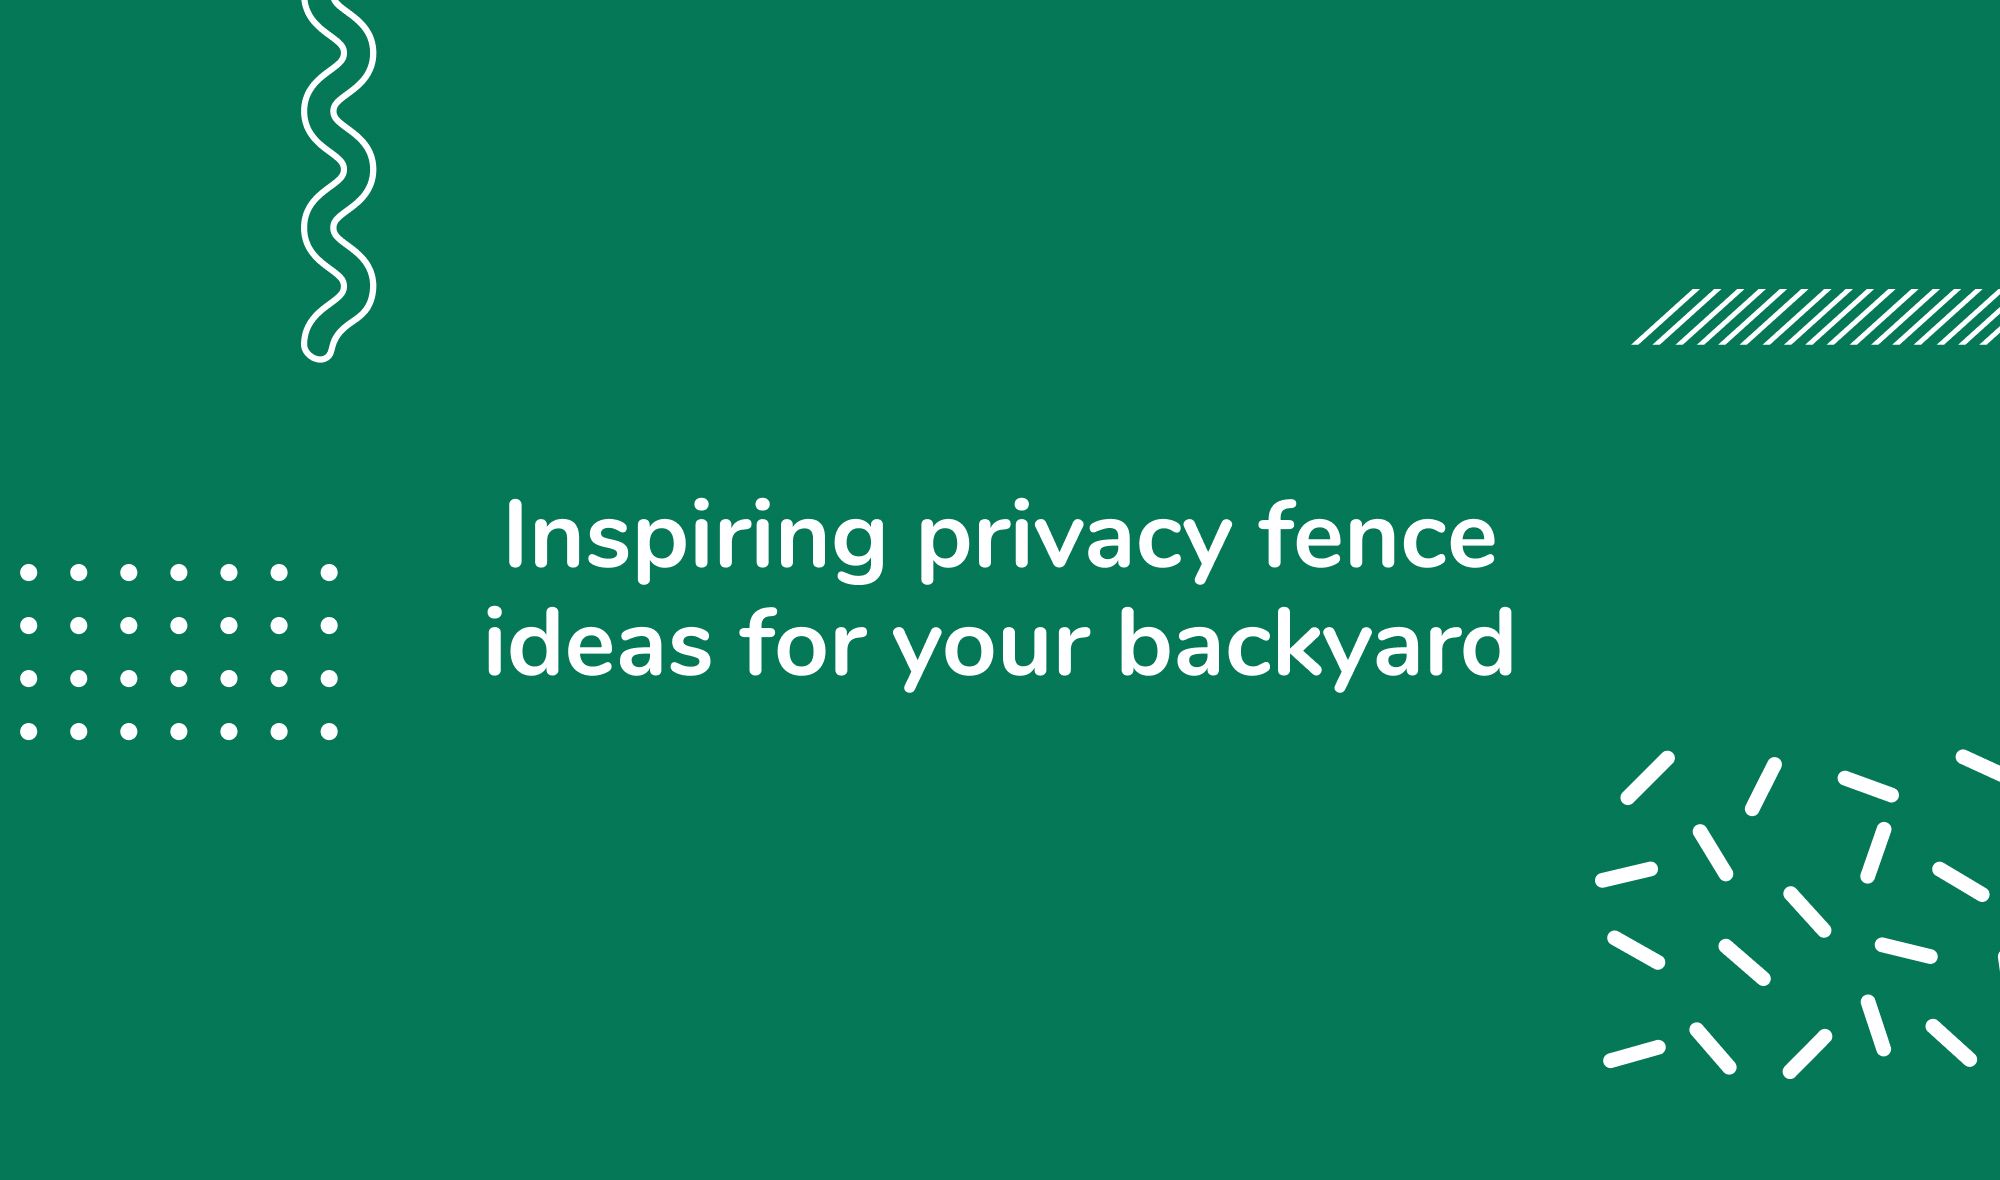 Inspiring privacy fence ideas for your backyard